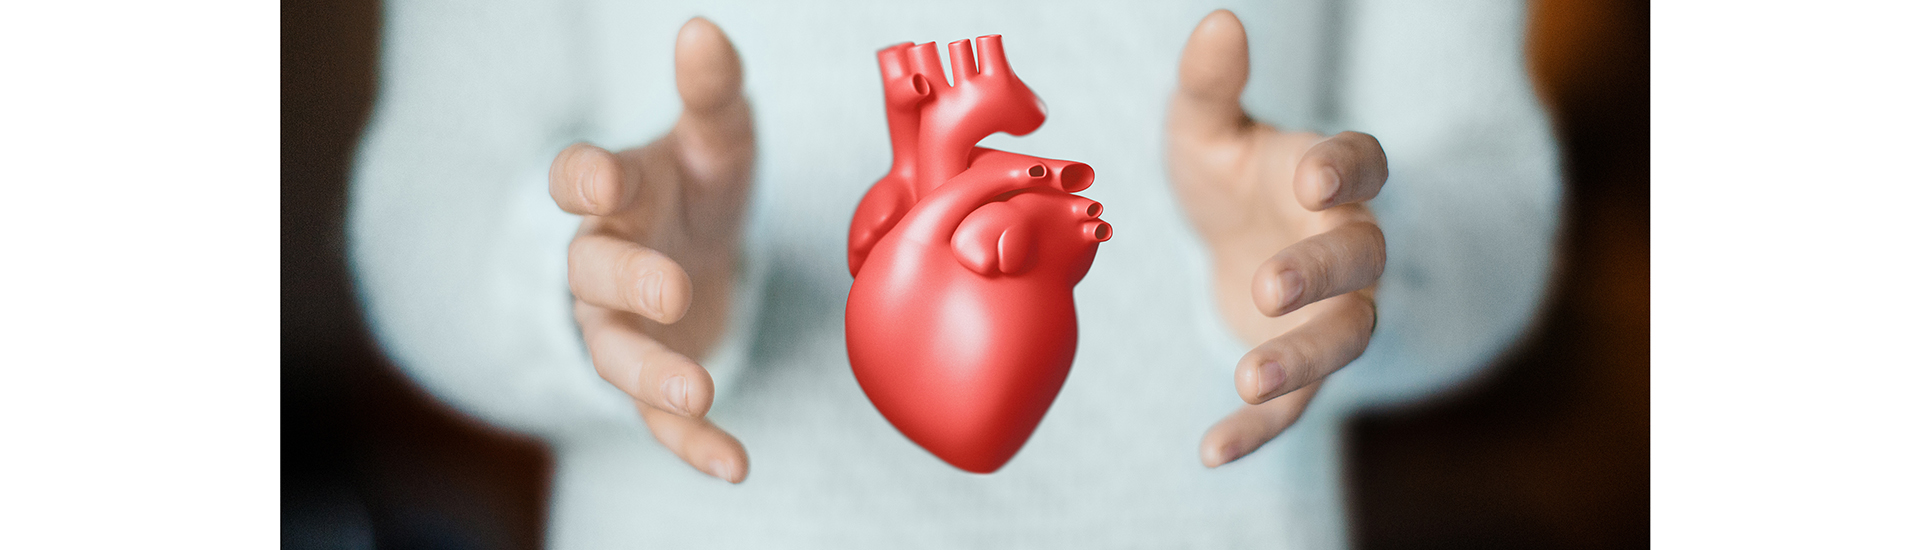 The heart is of sufficient quality for transplantation after euthanasia